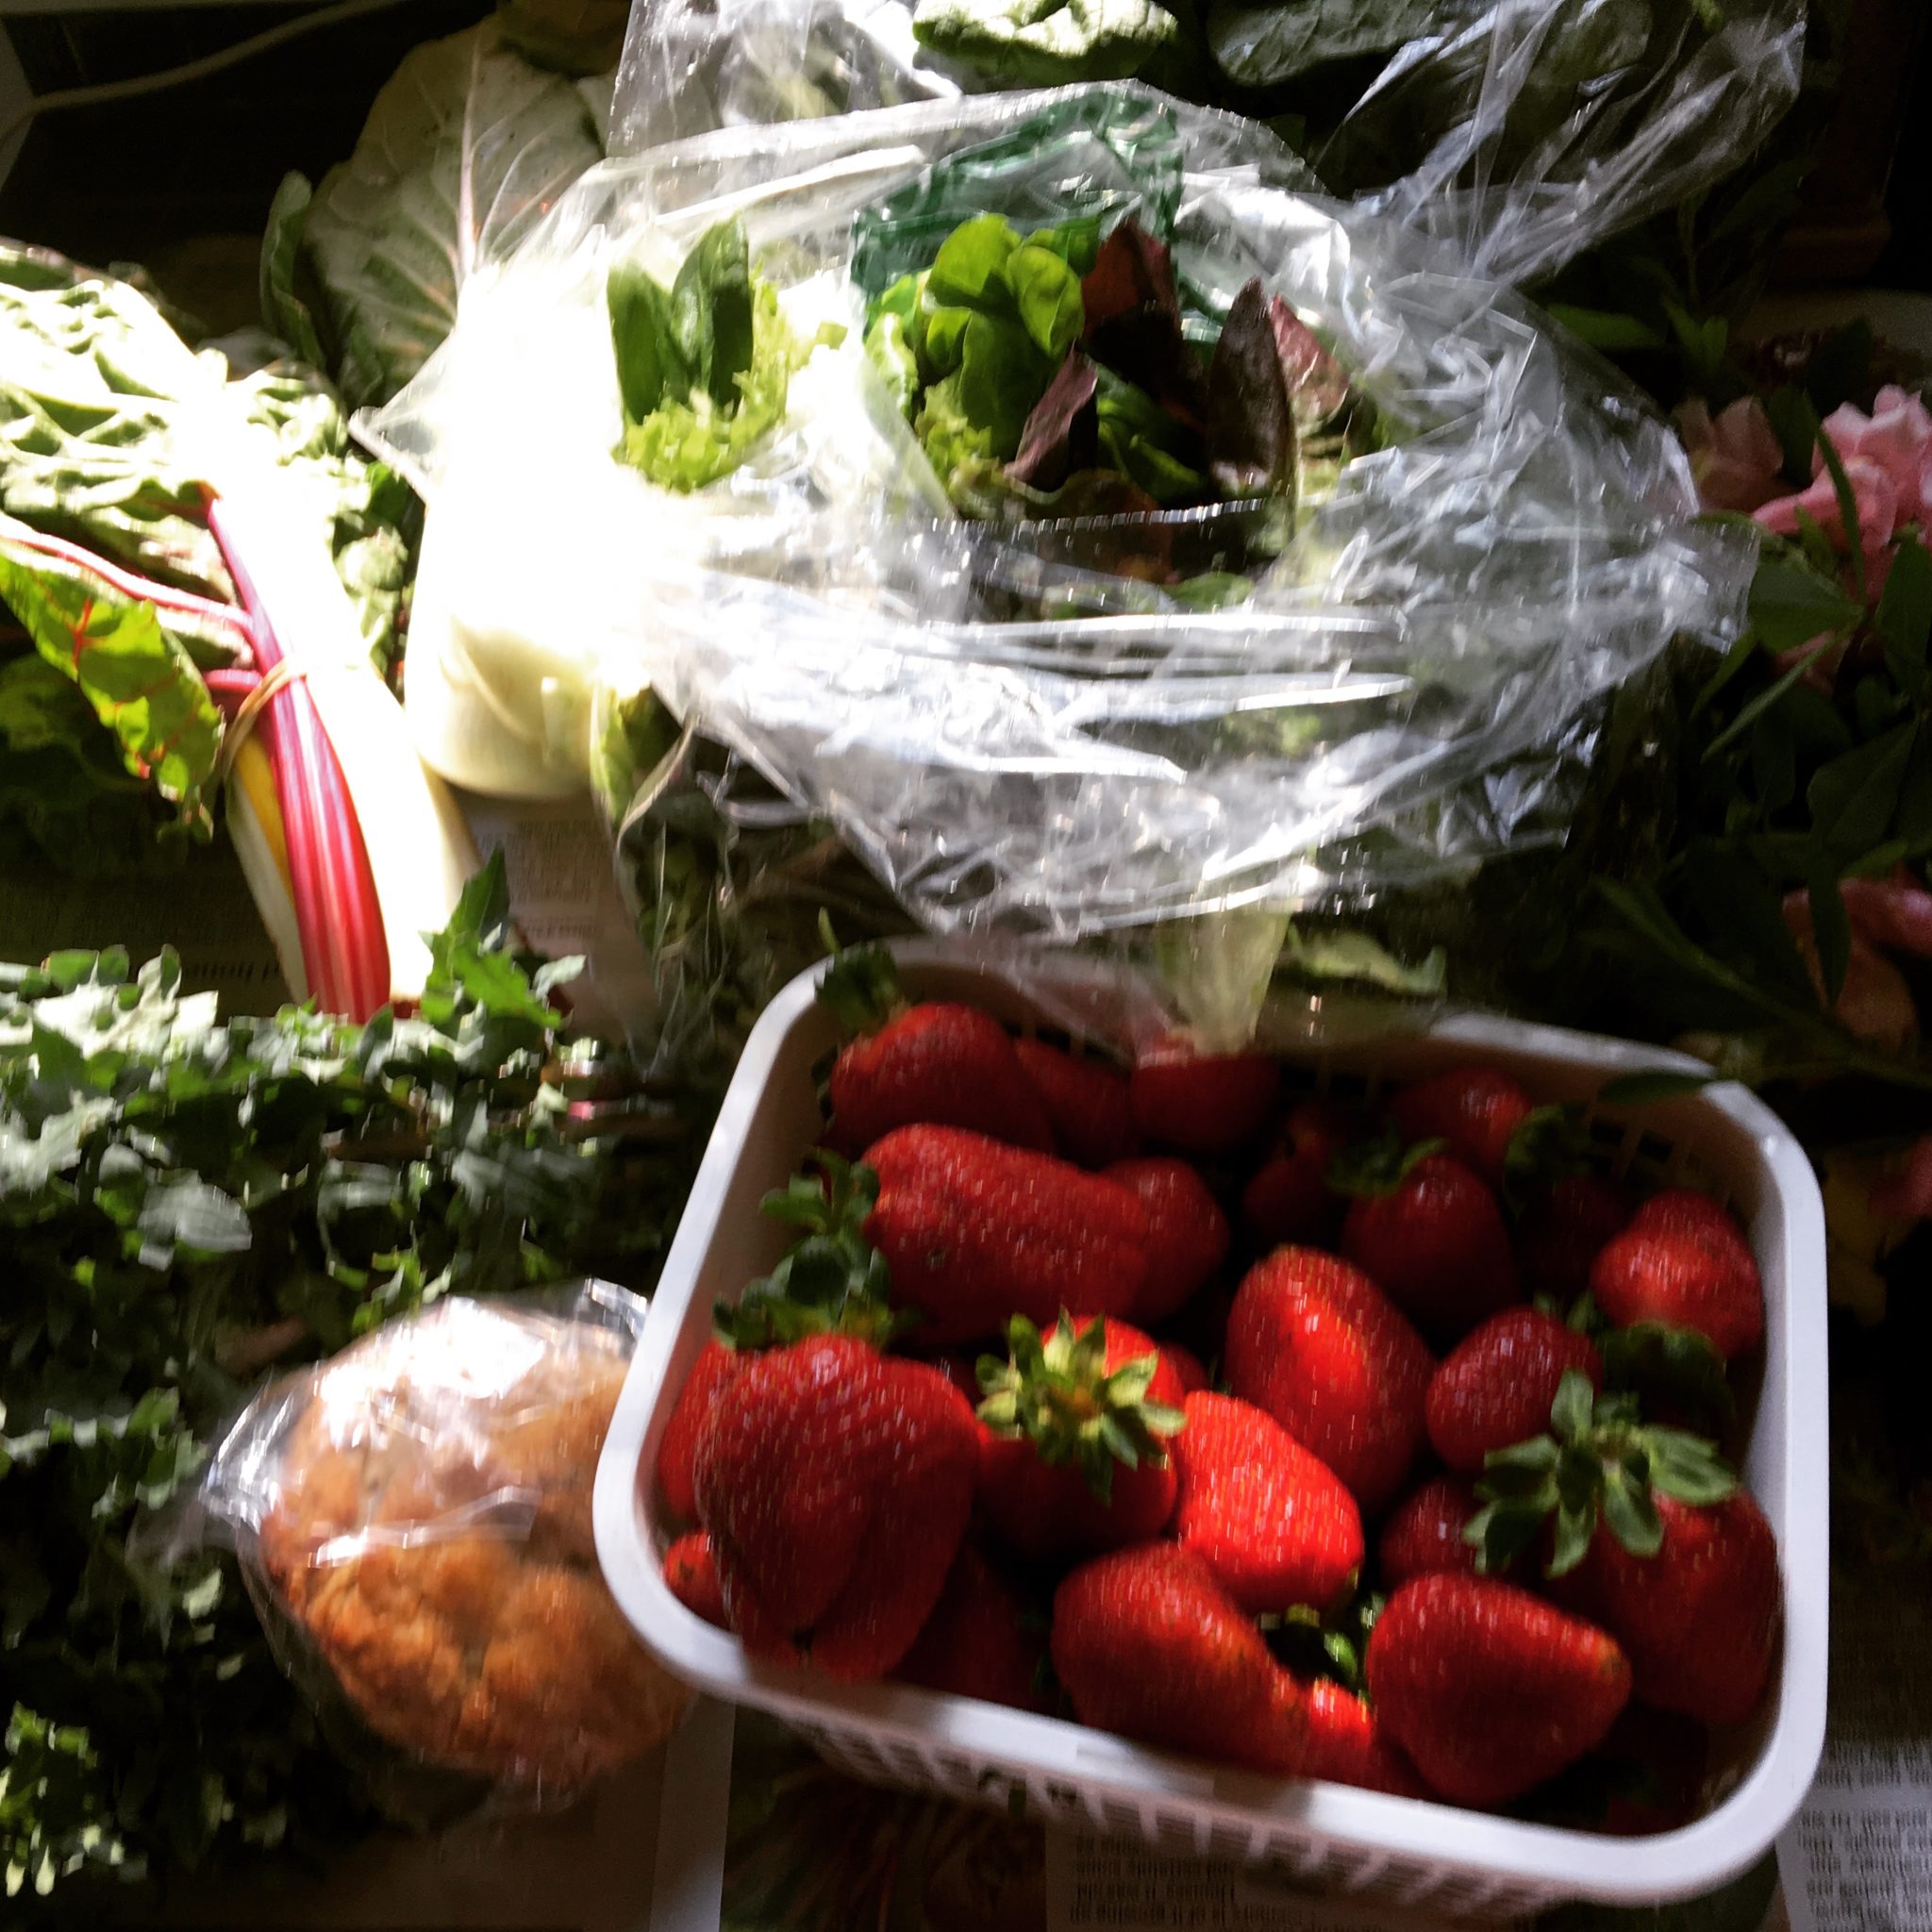 Contents of a CSA share